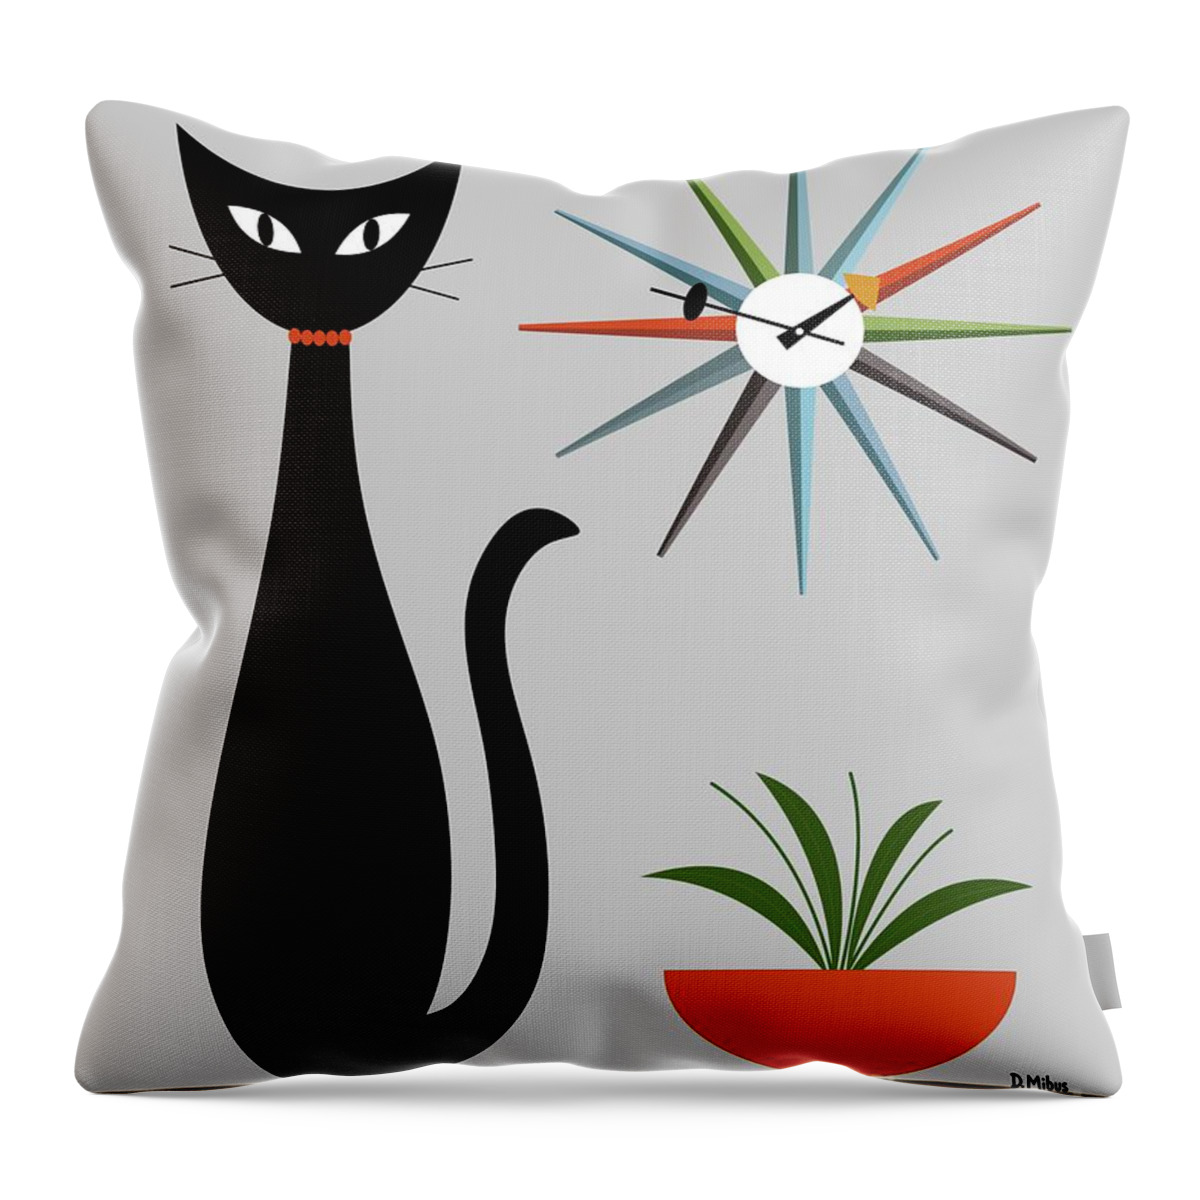 Mid Century Cat Throw Pillow featuring the digital art Mid Century Cat with Starburst Clock on Gray by Donna Mibus